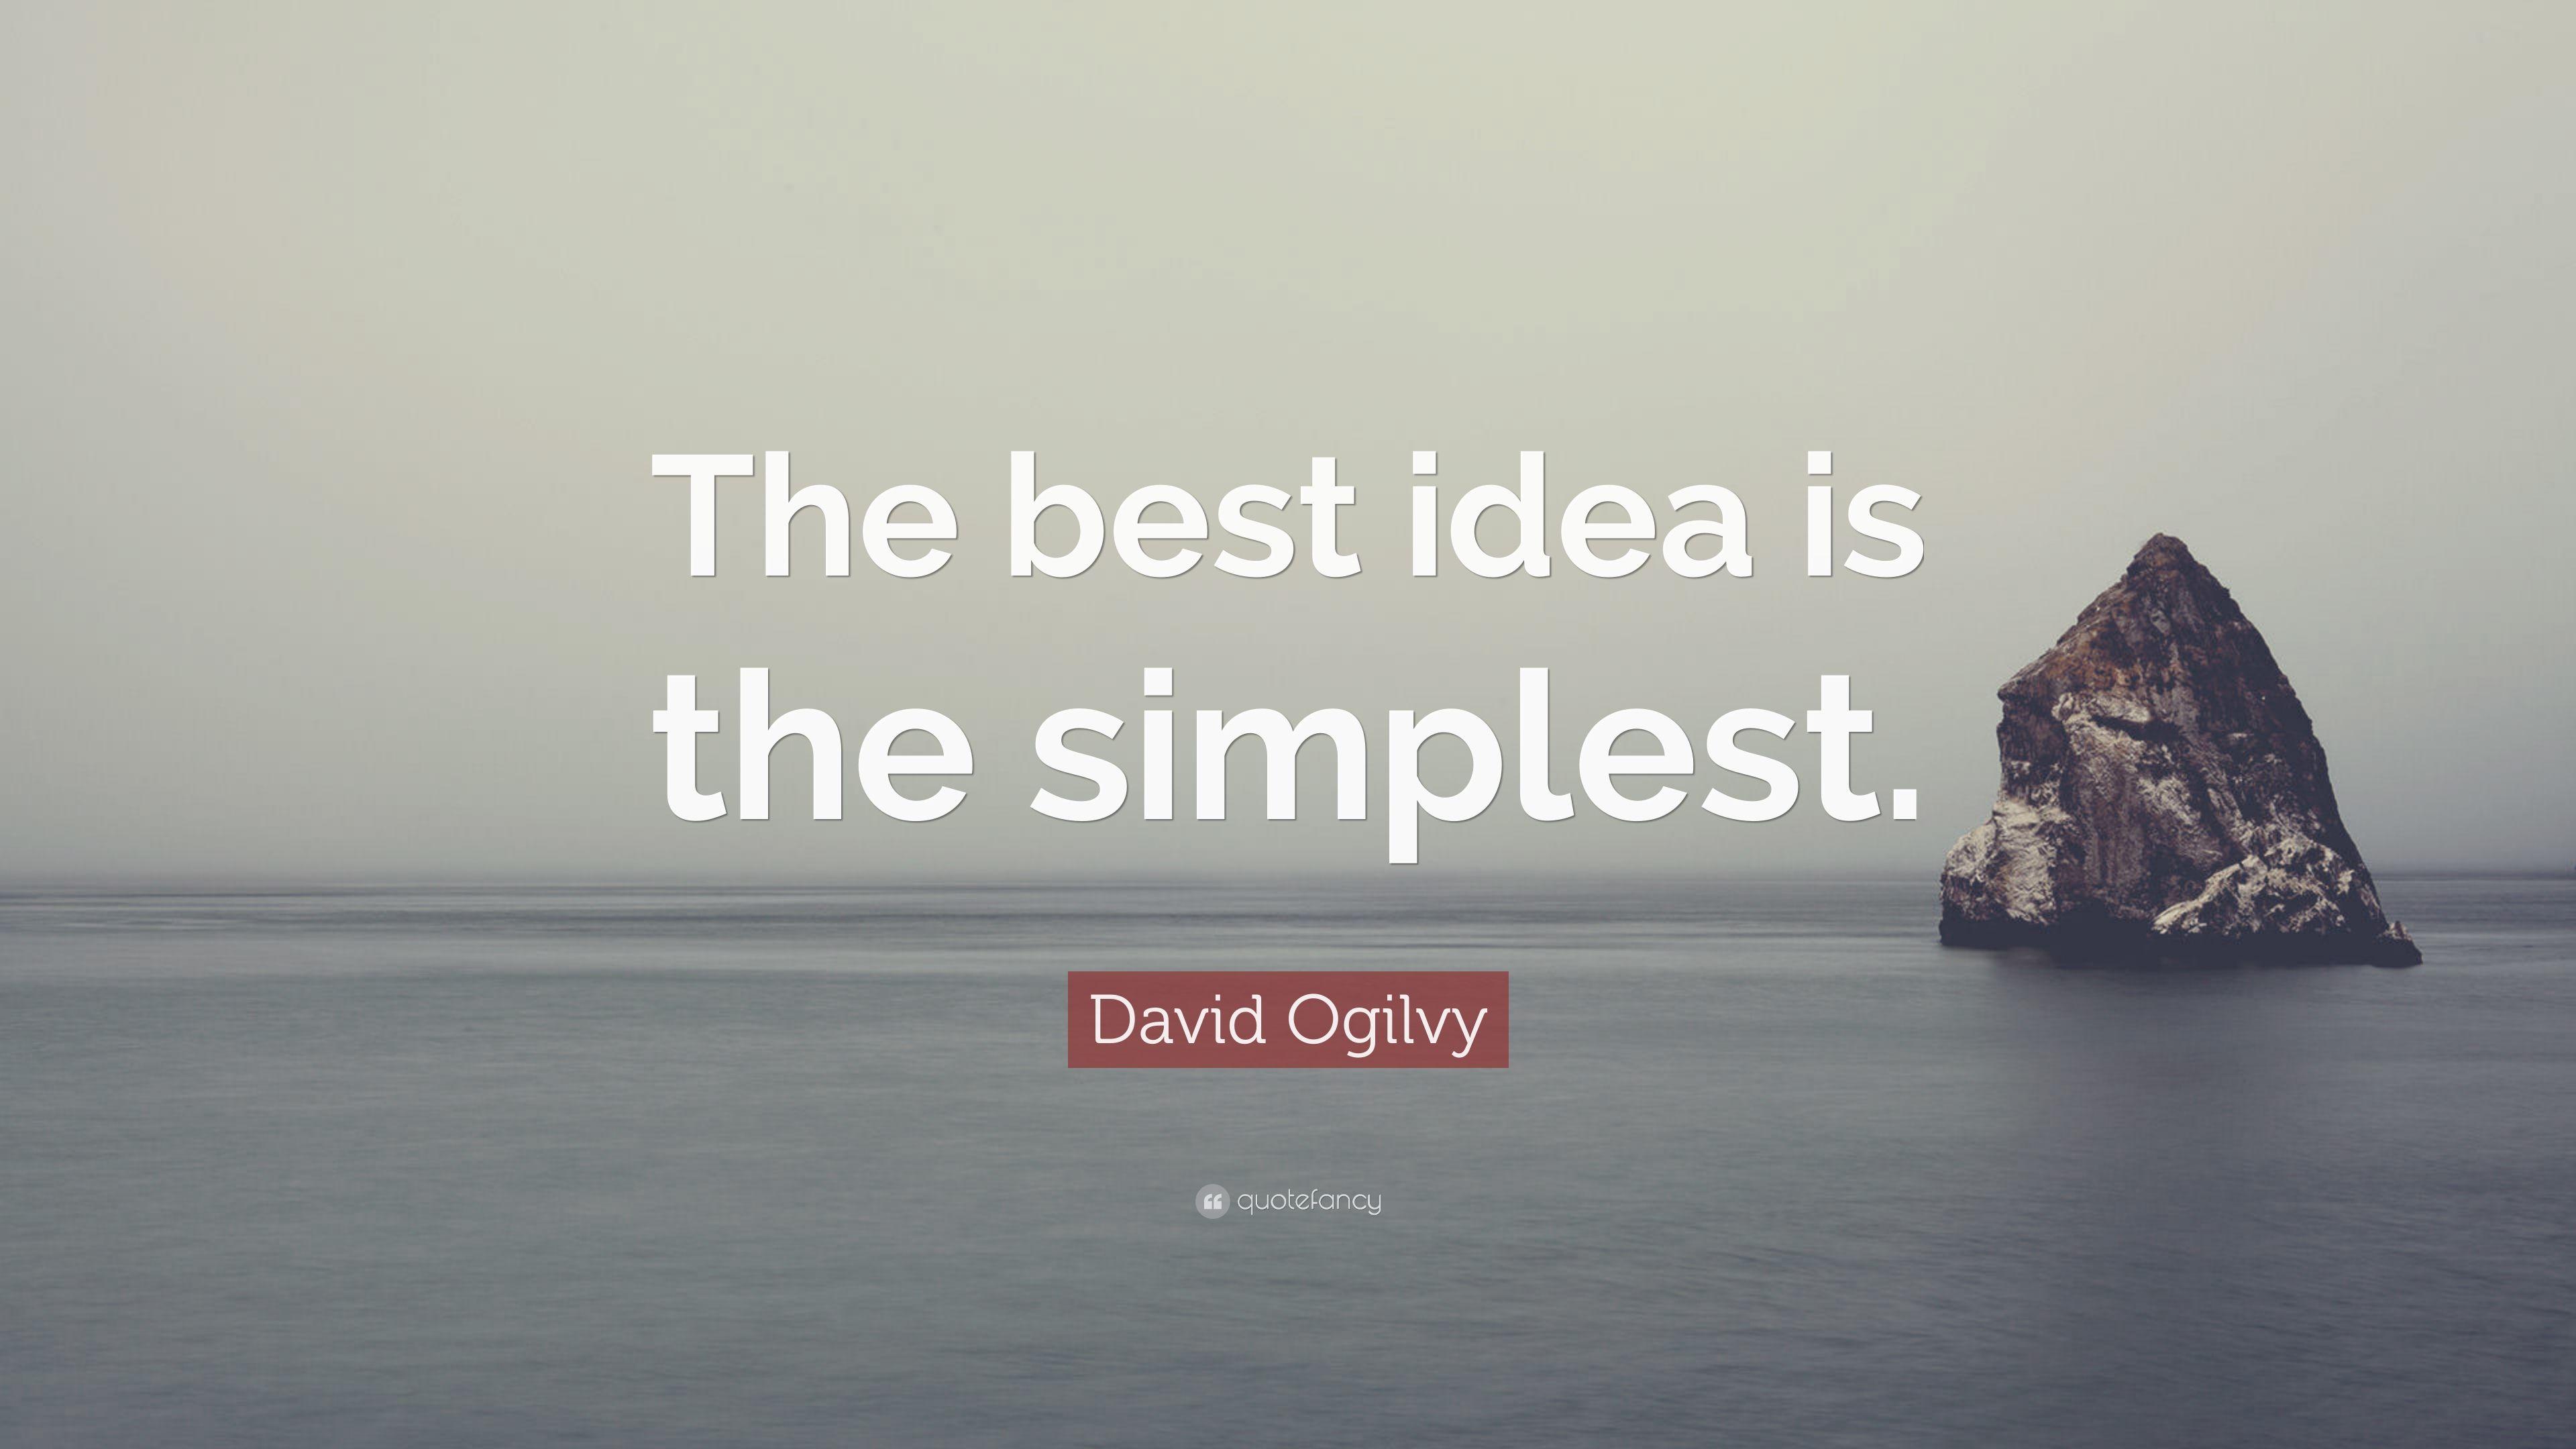 David Ogilvy Quote: "The best idea is the simplest. 